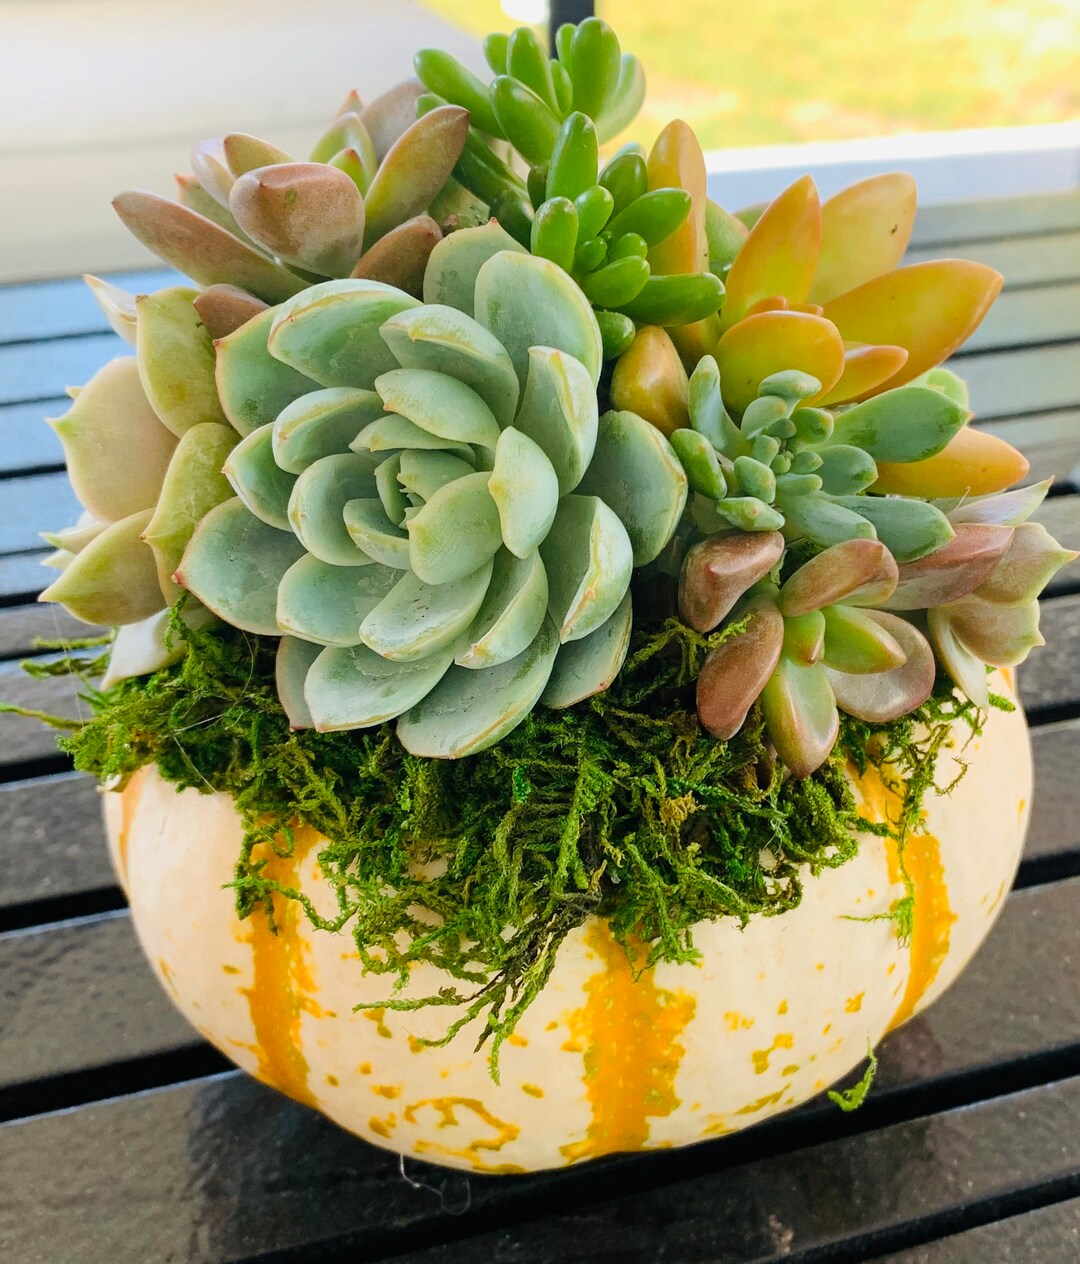 Tiger Striped Pumpkin Topped W/ Succulents - Etsy